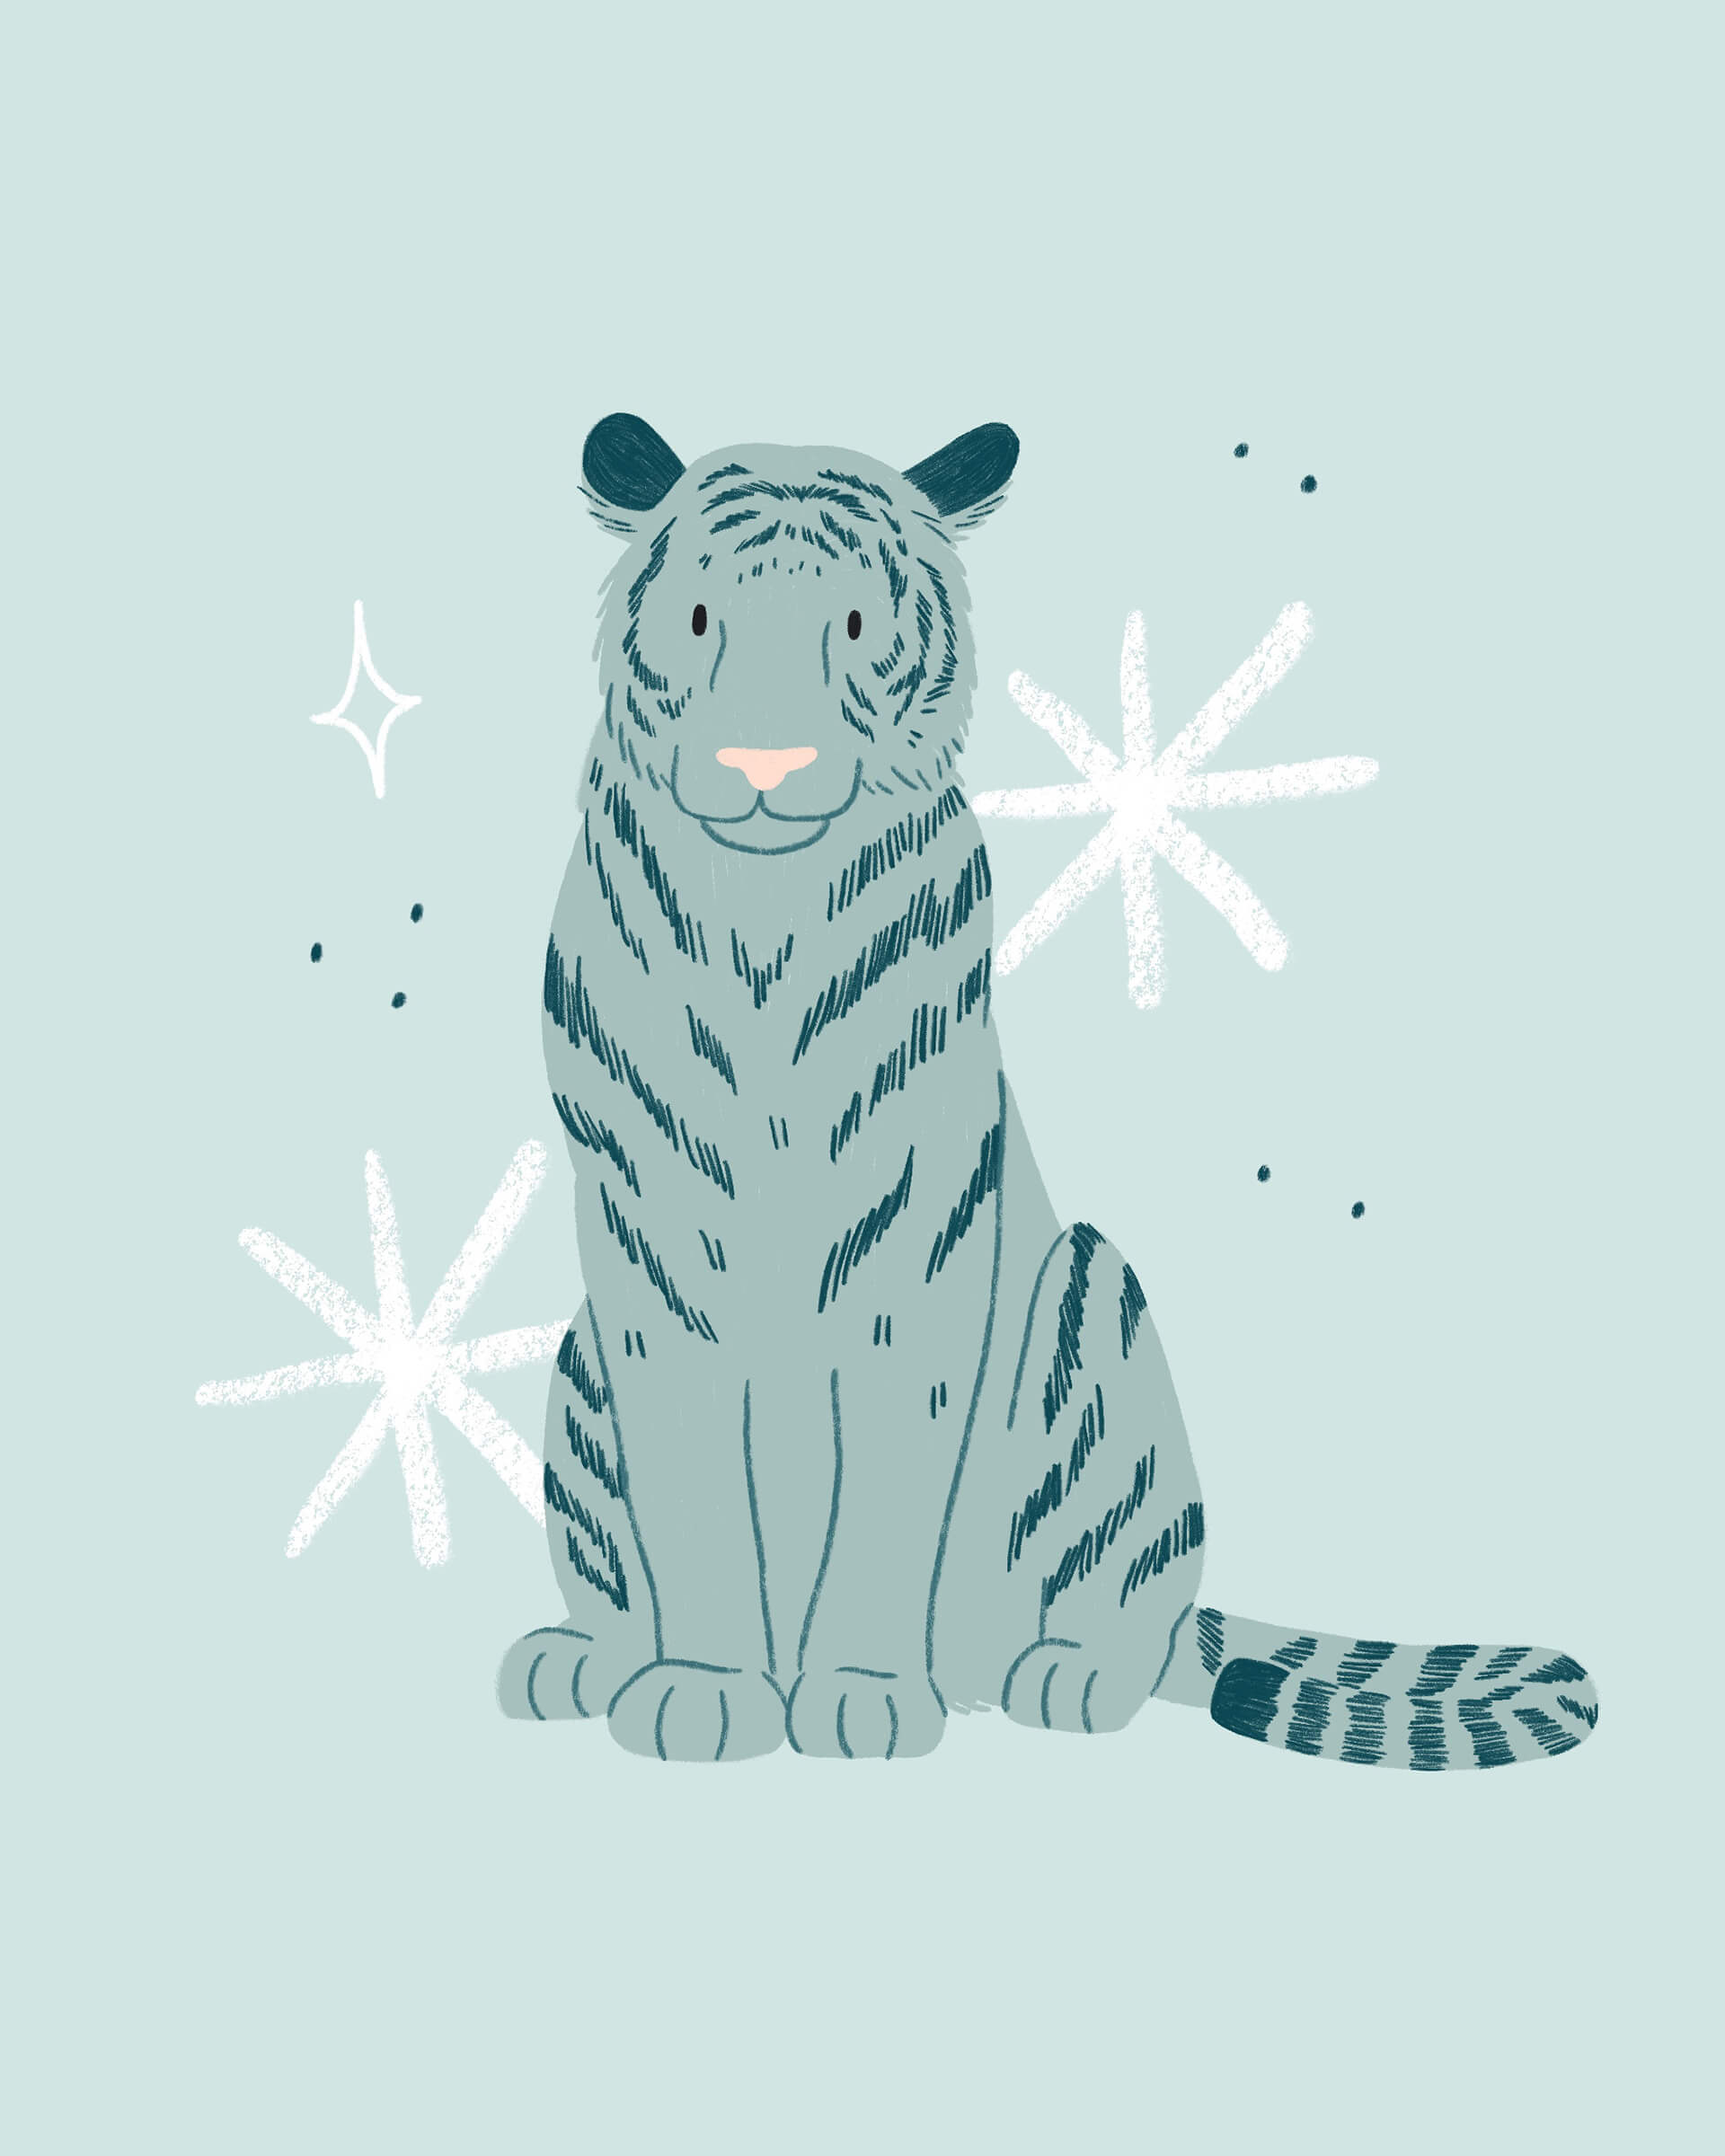 An illustration of a blue tiger sitting and looking towards the viewer